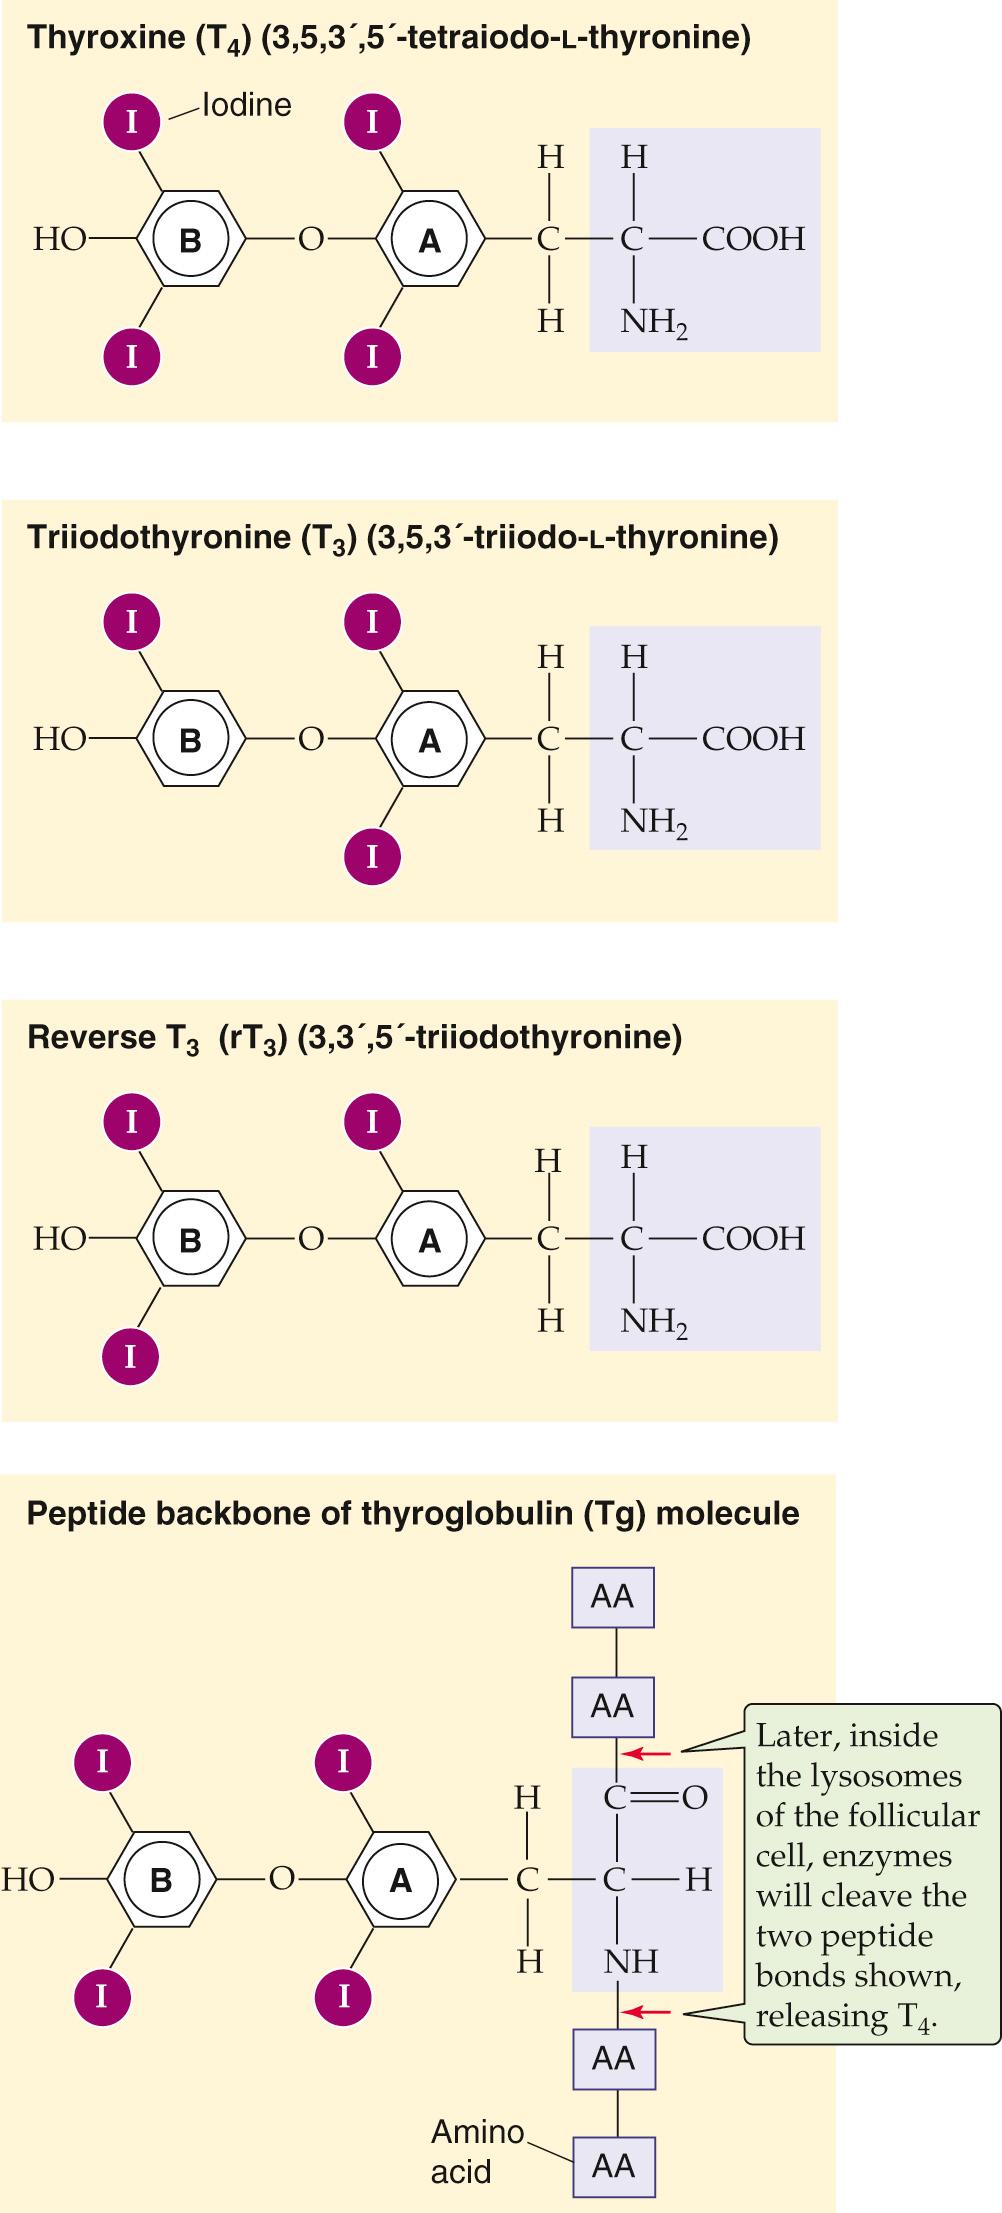 Figure 49-2, Structure of T 4 , T 3 , and rT 3 . T 4 , T 3 , and rT 3 all are products of the coupling of two iodinated tyrosine derivatives. Only T 4 and T 3 are biologically active, and T 3 is far more active than T 4 because of a higher affinity for thyroid hormone receptors. rT 3 forms as an iodine is removed from the inner benzyl ring of T 4 (labeled “A”); rT 3 is present in approximately equal molar amounts with T 3 . However, rT 3 is essentially devoid of biological activity. As shown in the bottom panel, T 4 is part of the peptide backbone of the thyroglobulin molecule, as are T 3 and rT 3 . Cleavage of the two indicated peptide bonds would release T 4 .